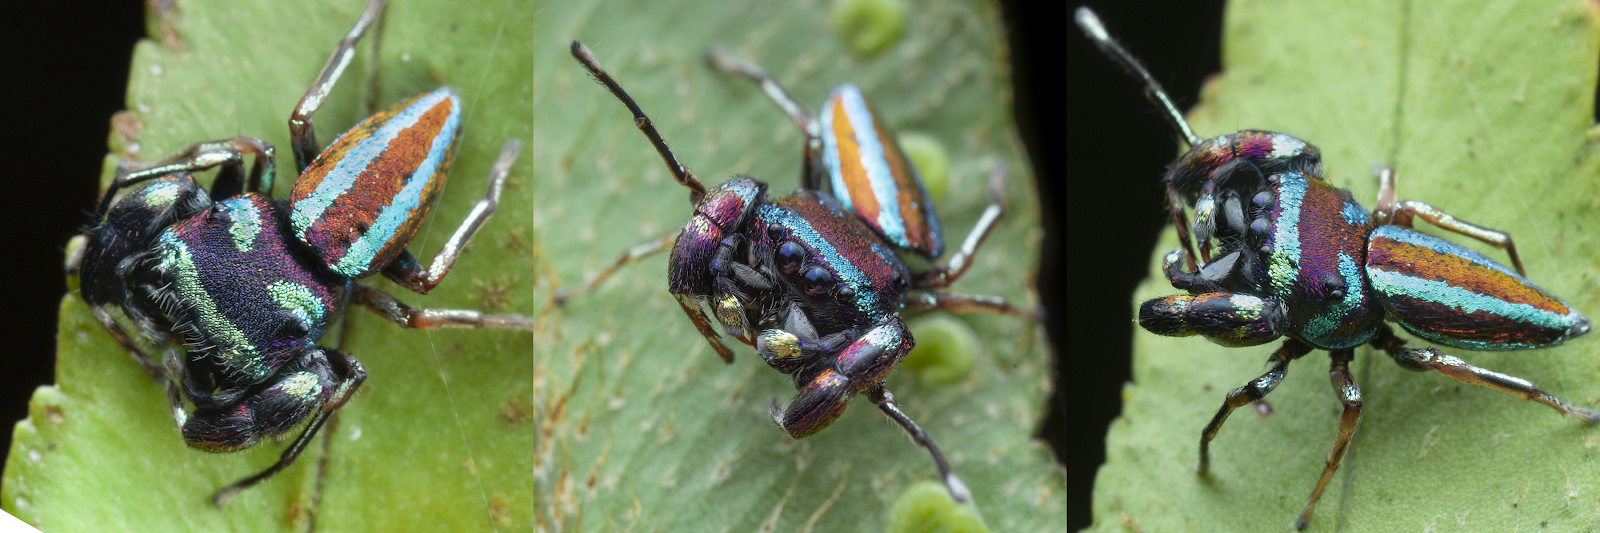 A colorful iridescent new species of jumping spider from the Philippines